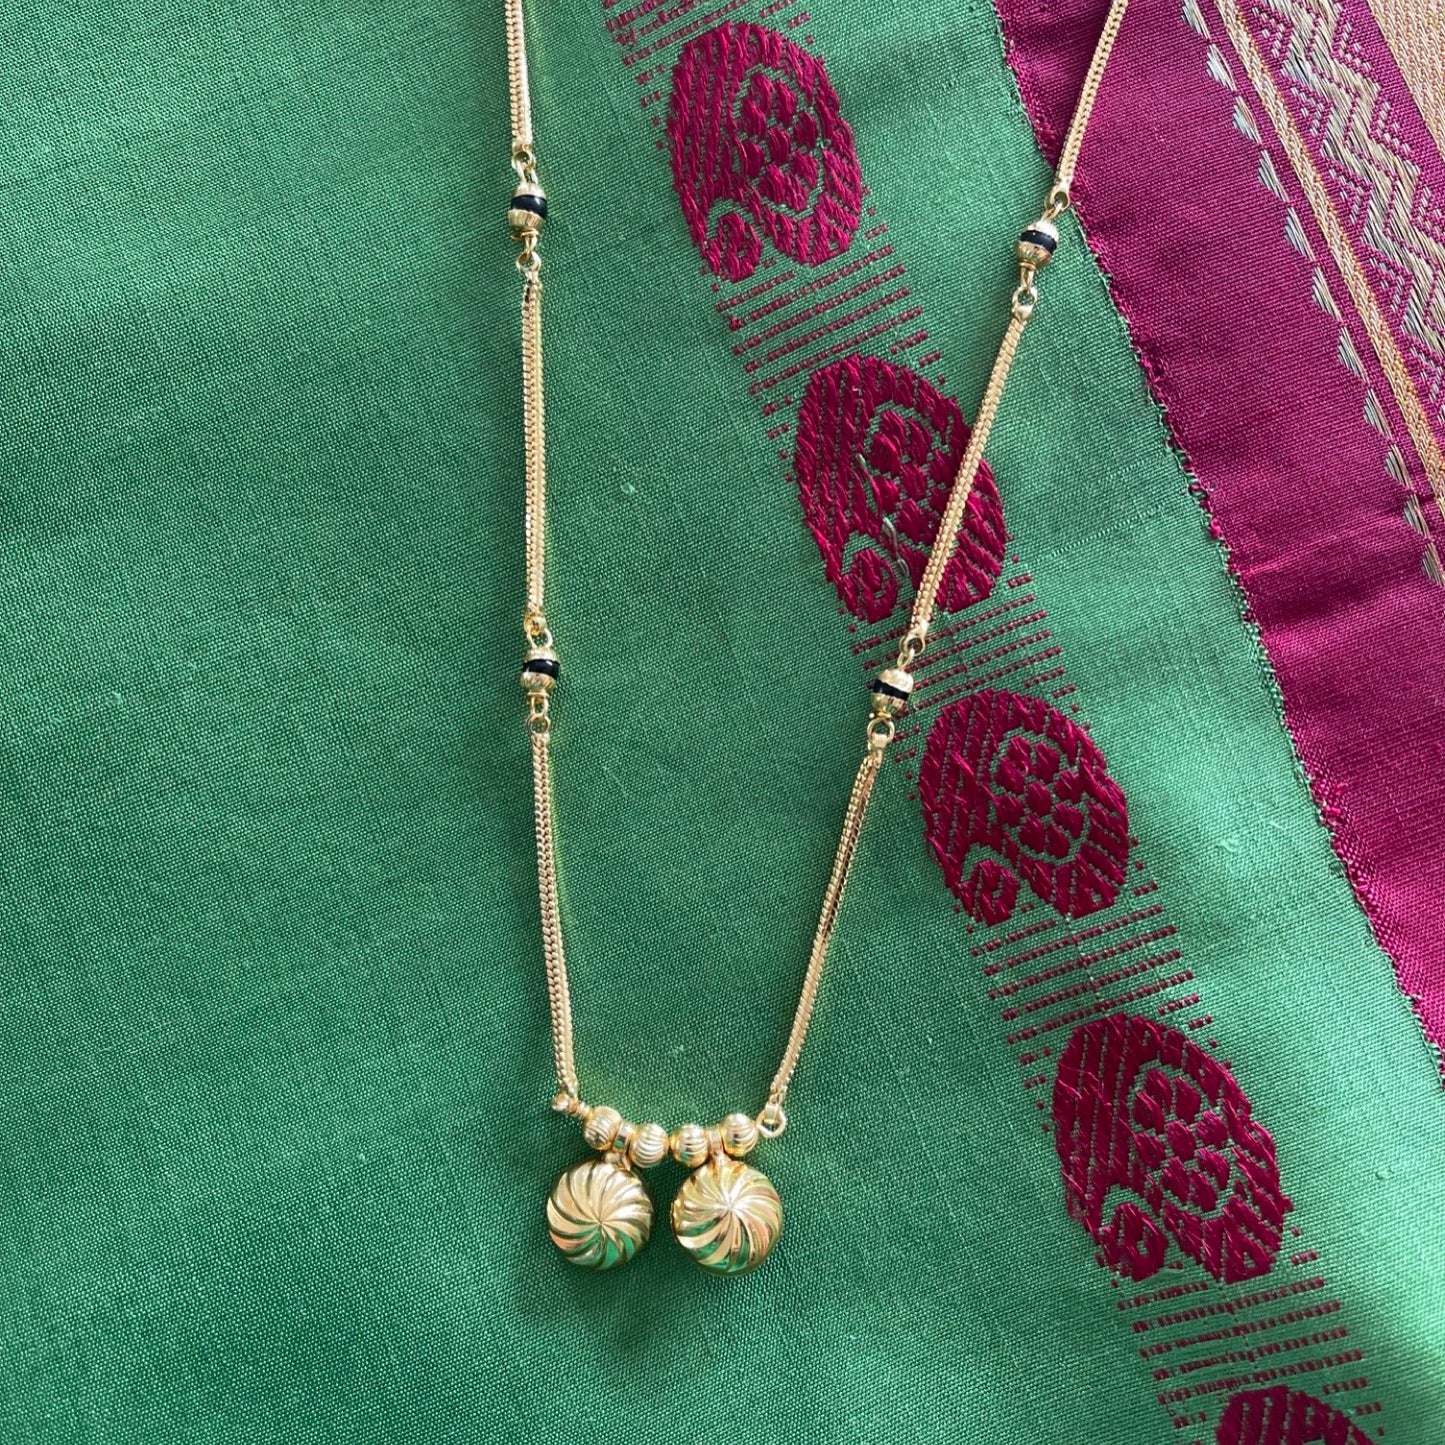 South Indian Style Long Mangalsutra Designs Vati Pendant With Simple Black Beads Gold Chain